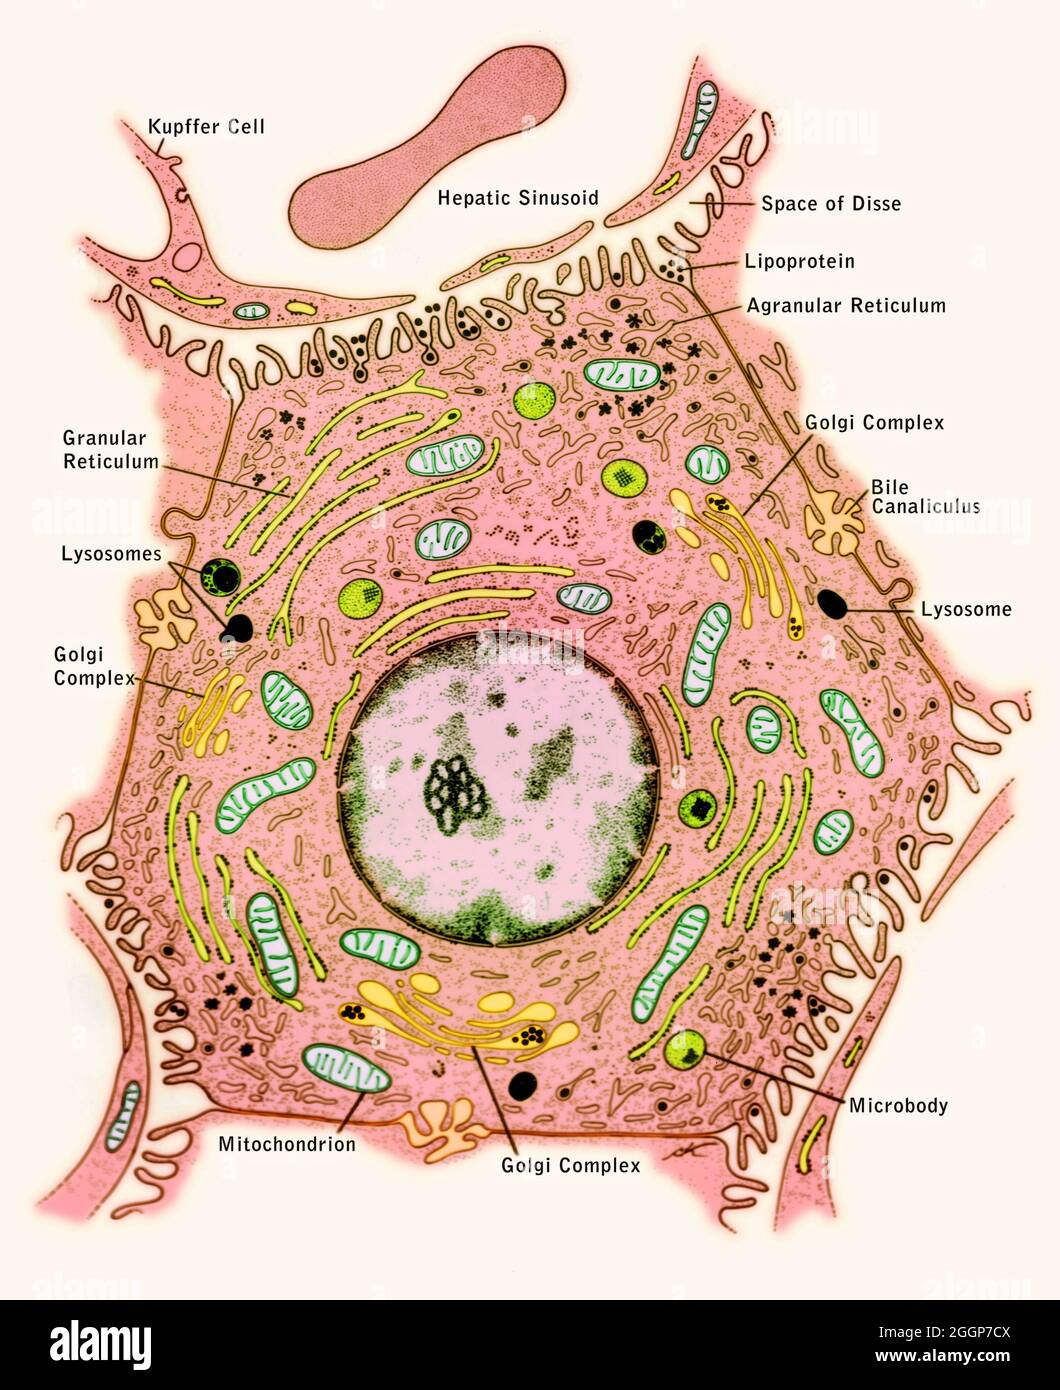 Labeled, illustrated diagram of the ultrastructure and relationships of a liver cell. Stock Photo